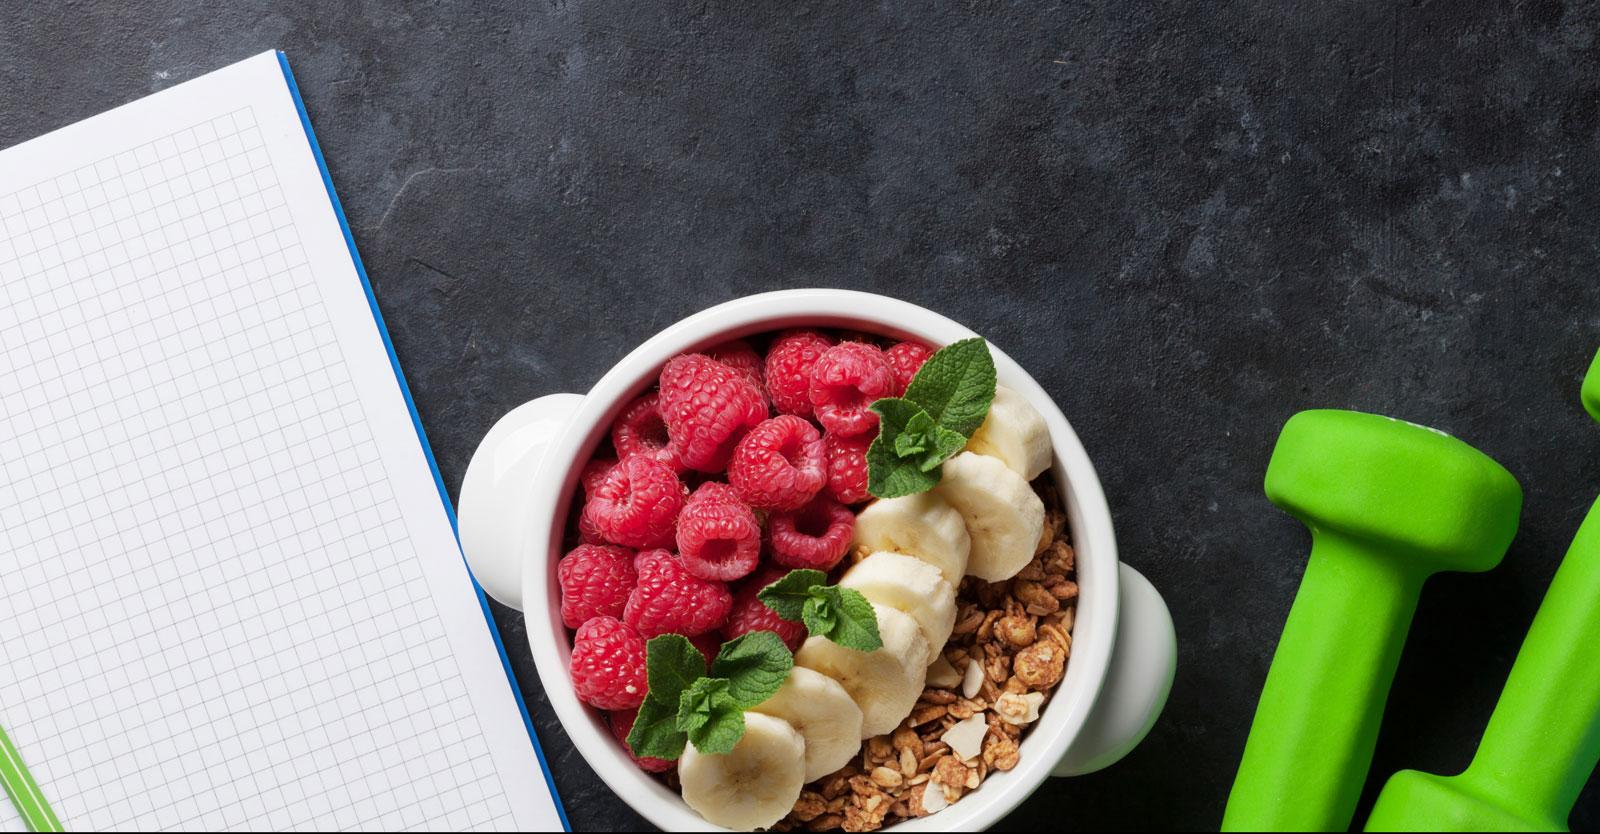 A notebook, a bowl of cereal with fruit, and some green weights on a table.